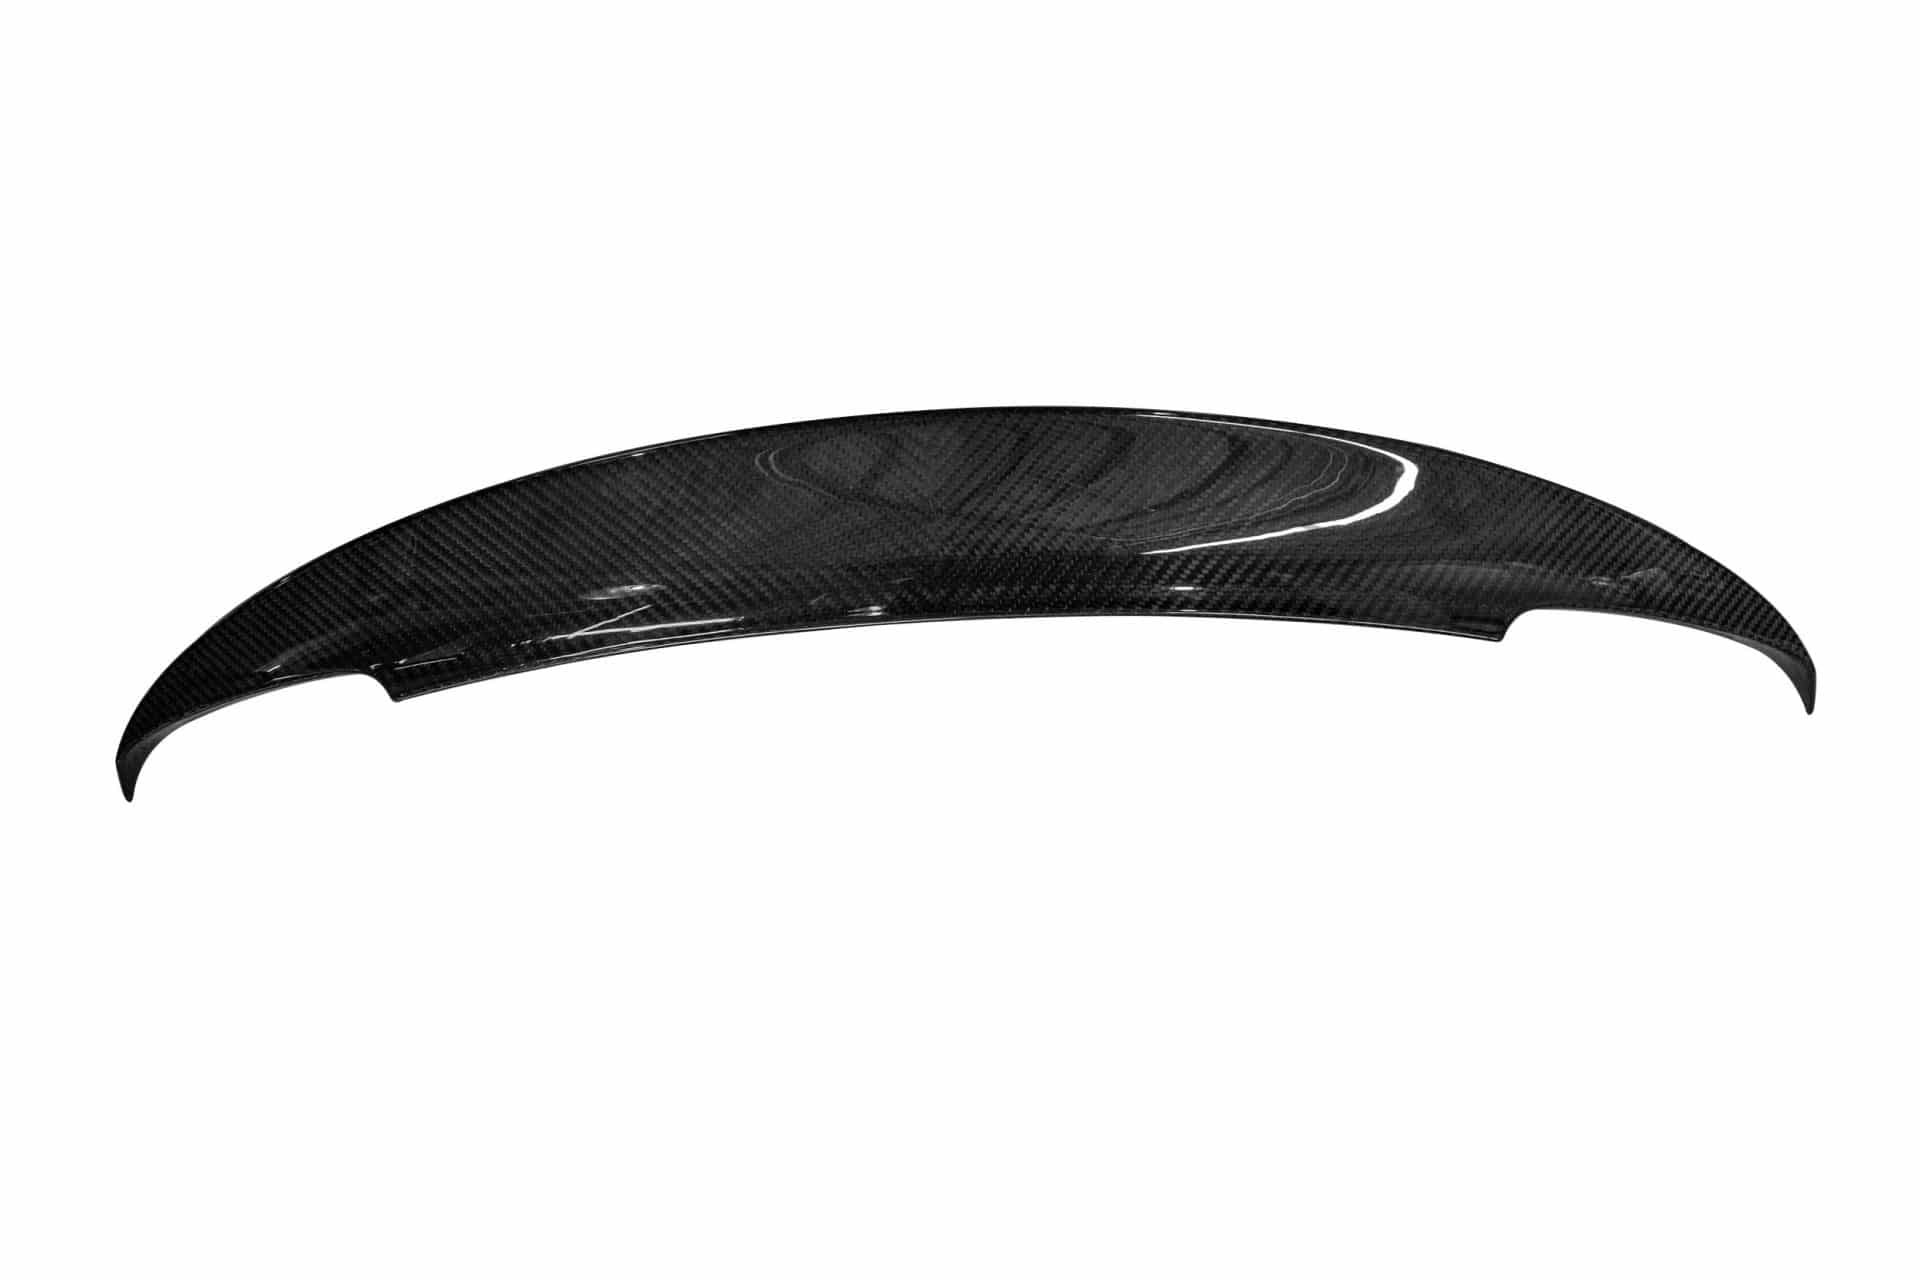 Unplugged Performance Dry Carbon Fiber Rear Decklid Spoiler (Gloss) for Tesla Model X new style